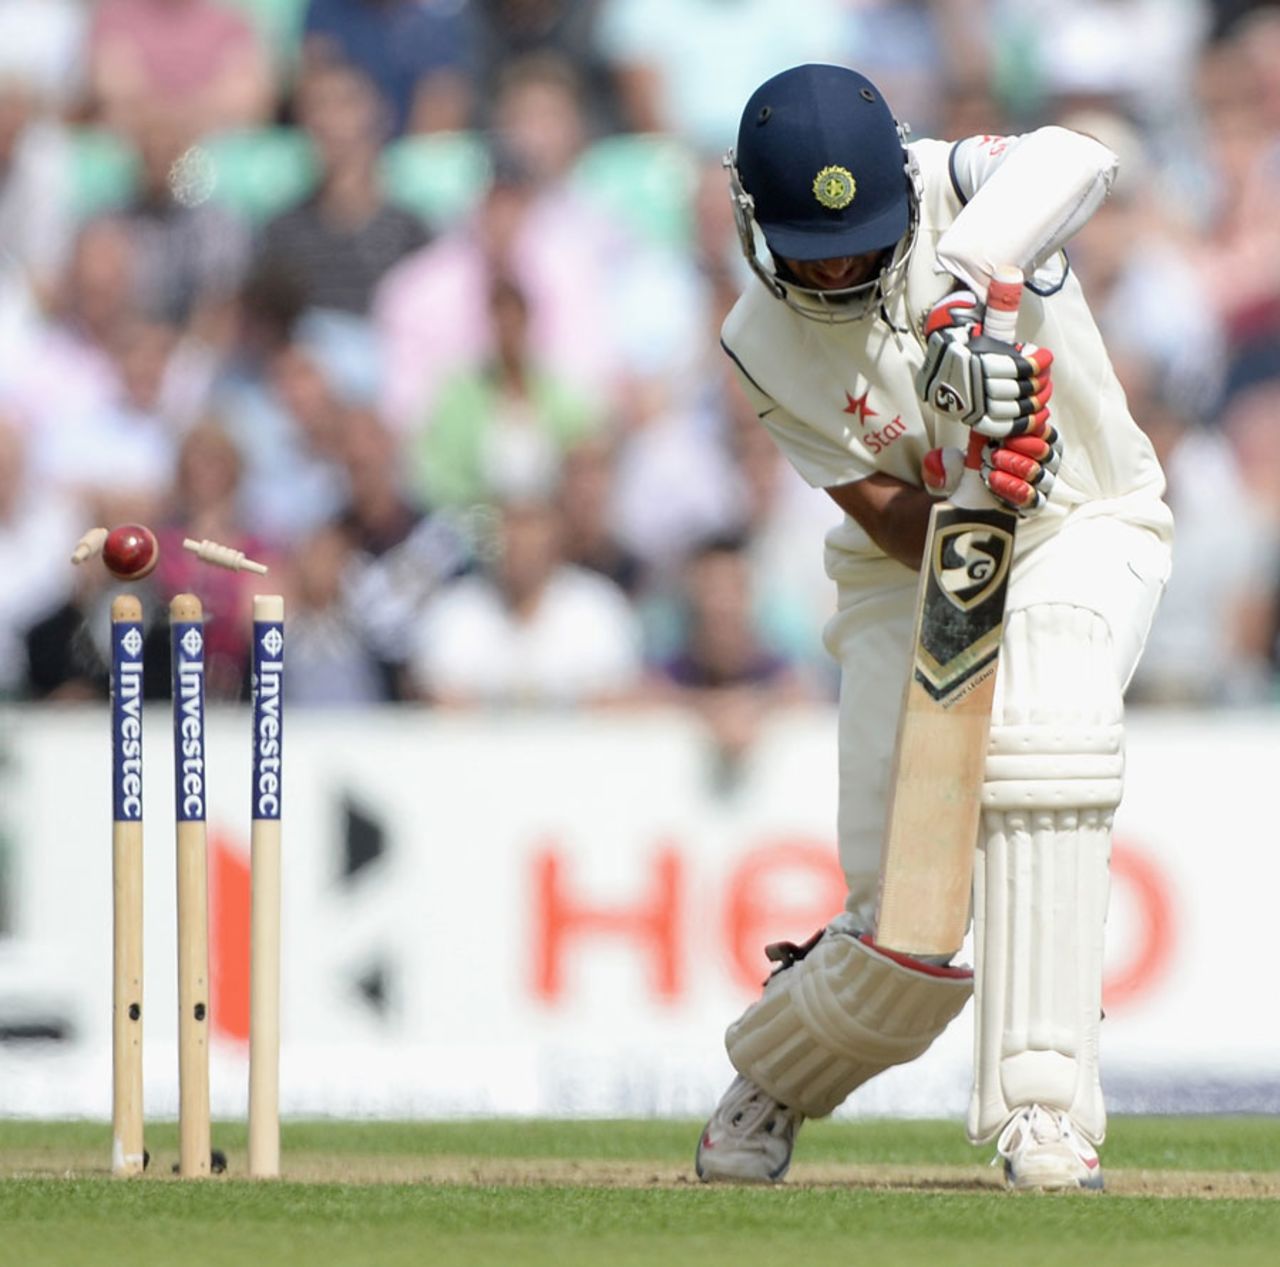 Cheteshwar Pujara had a torrid time outside his off stump, England v India, 5th Investec Test, The Oval, 1st day, August 15, 2014